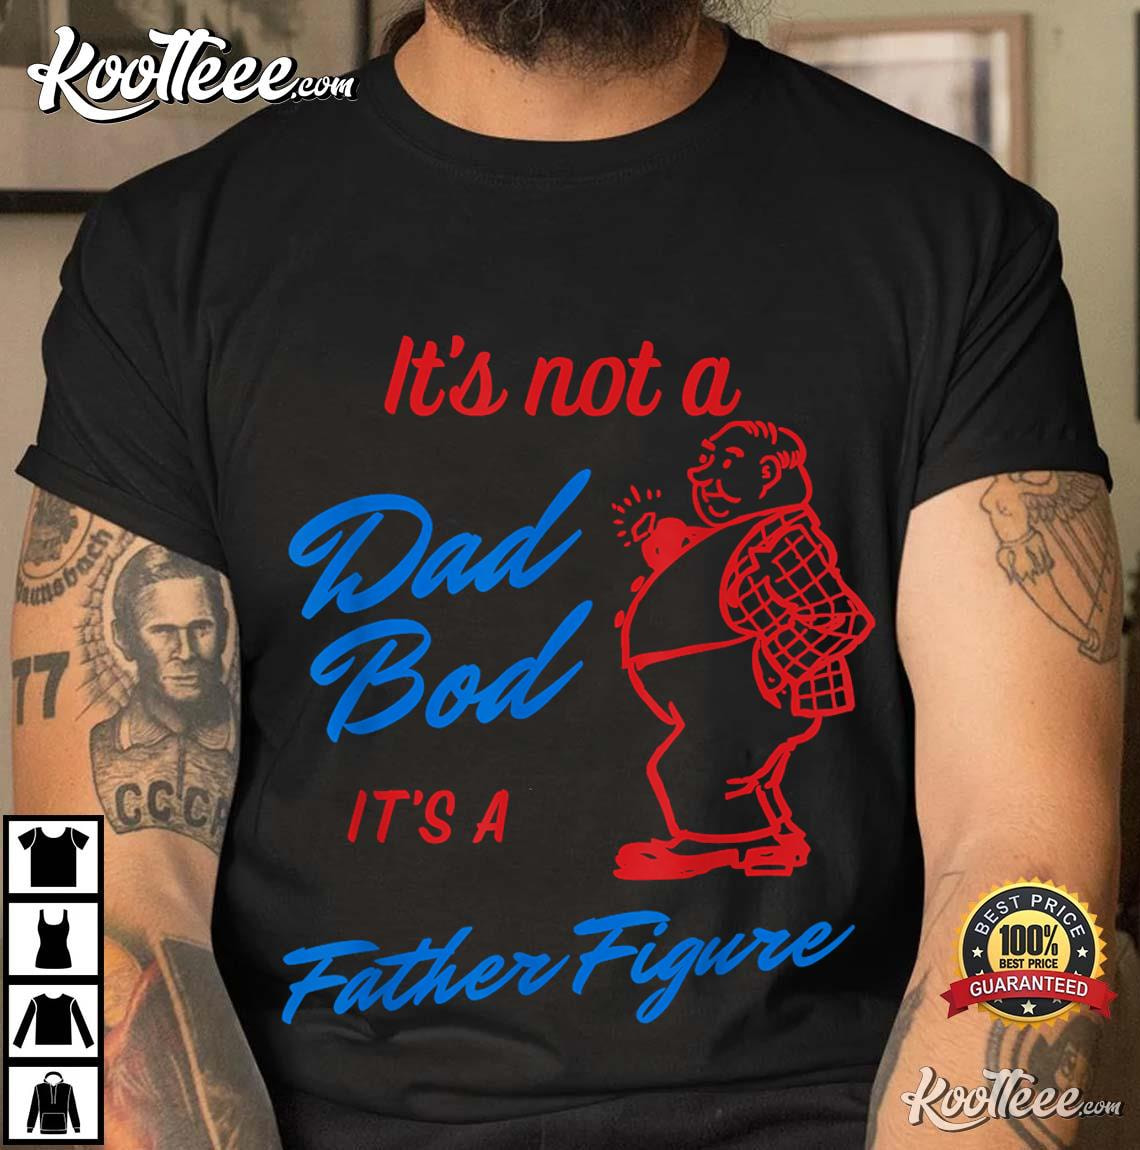 Mens It's Not A Dad Bod It's A Father Figure Funny T-Shirt